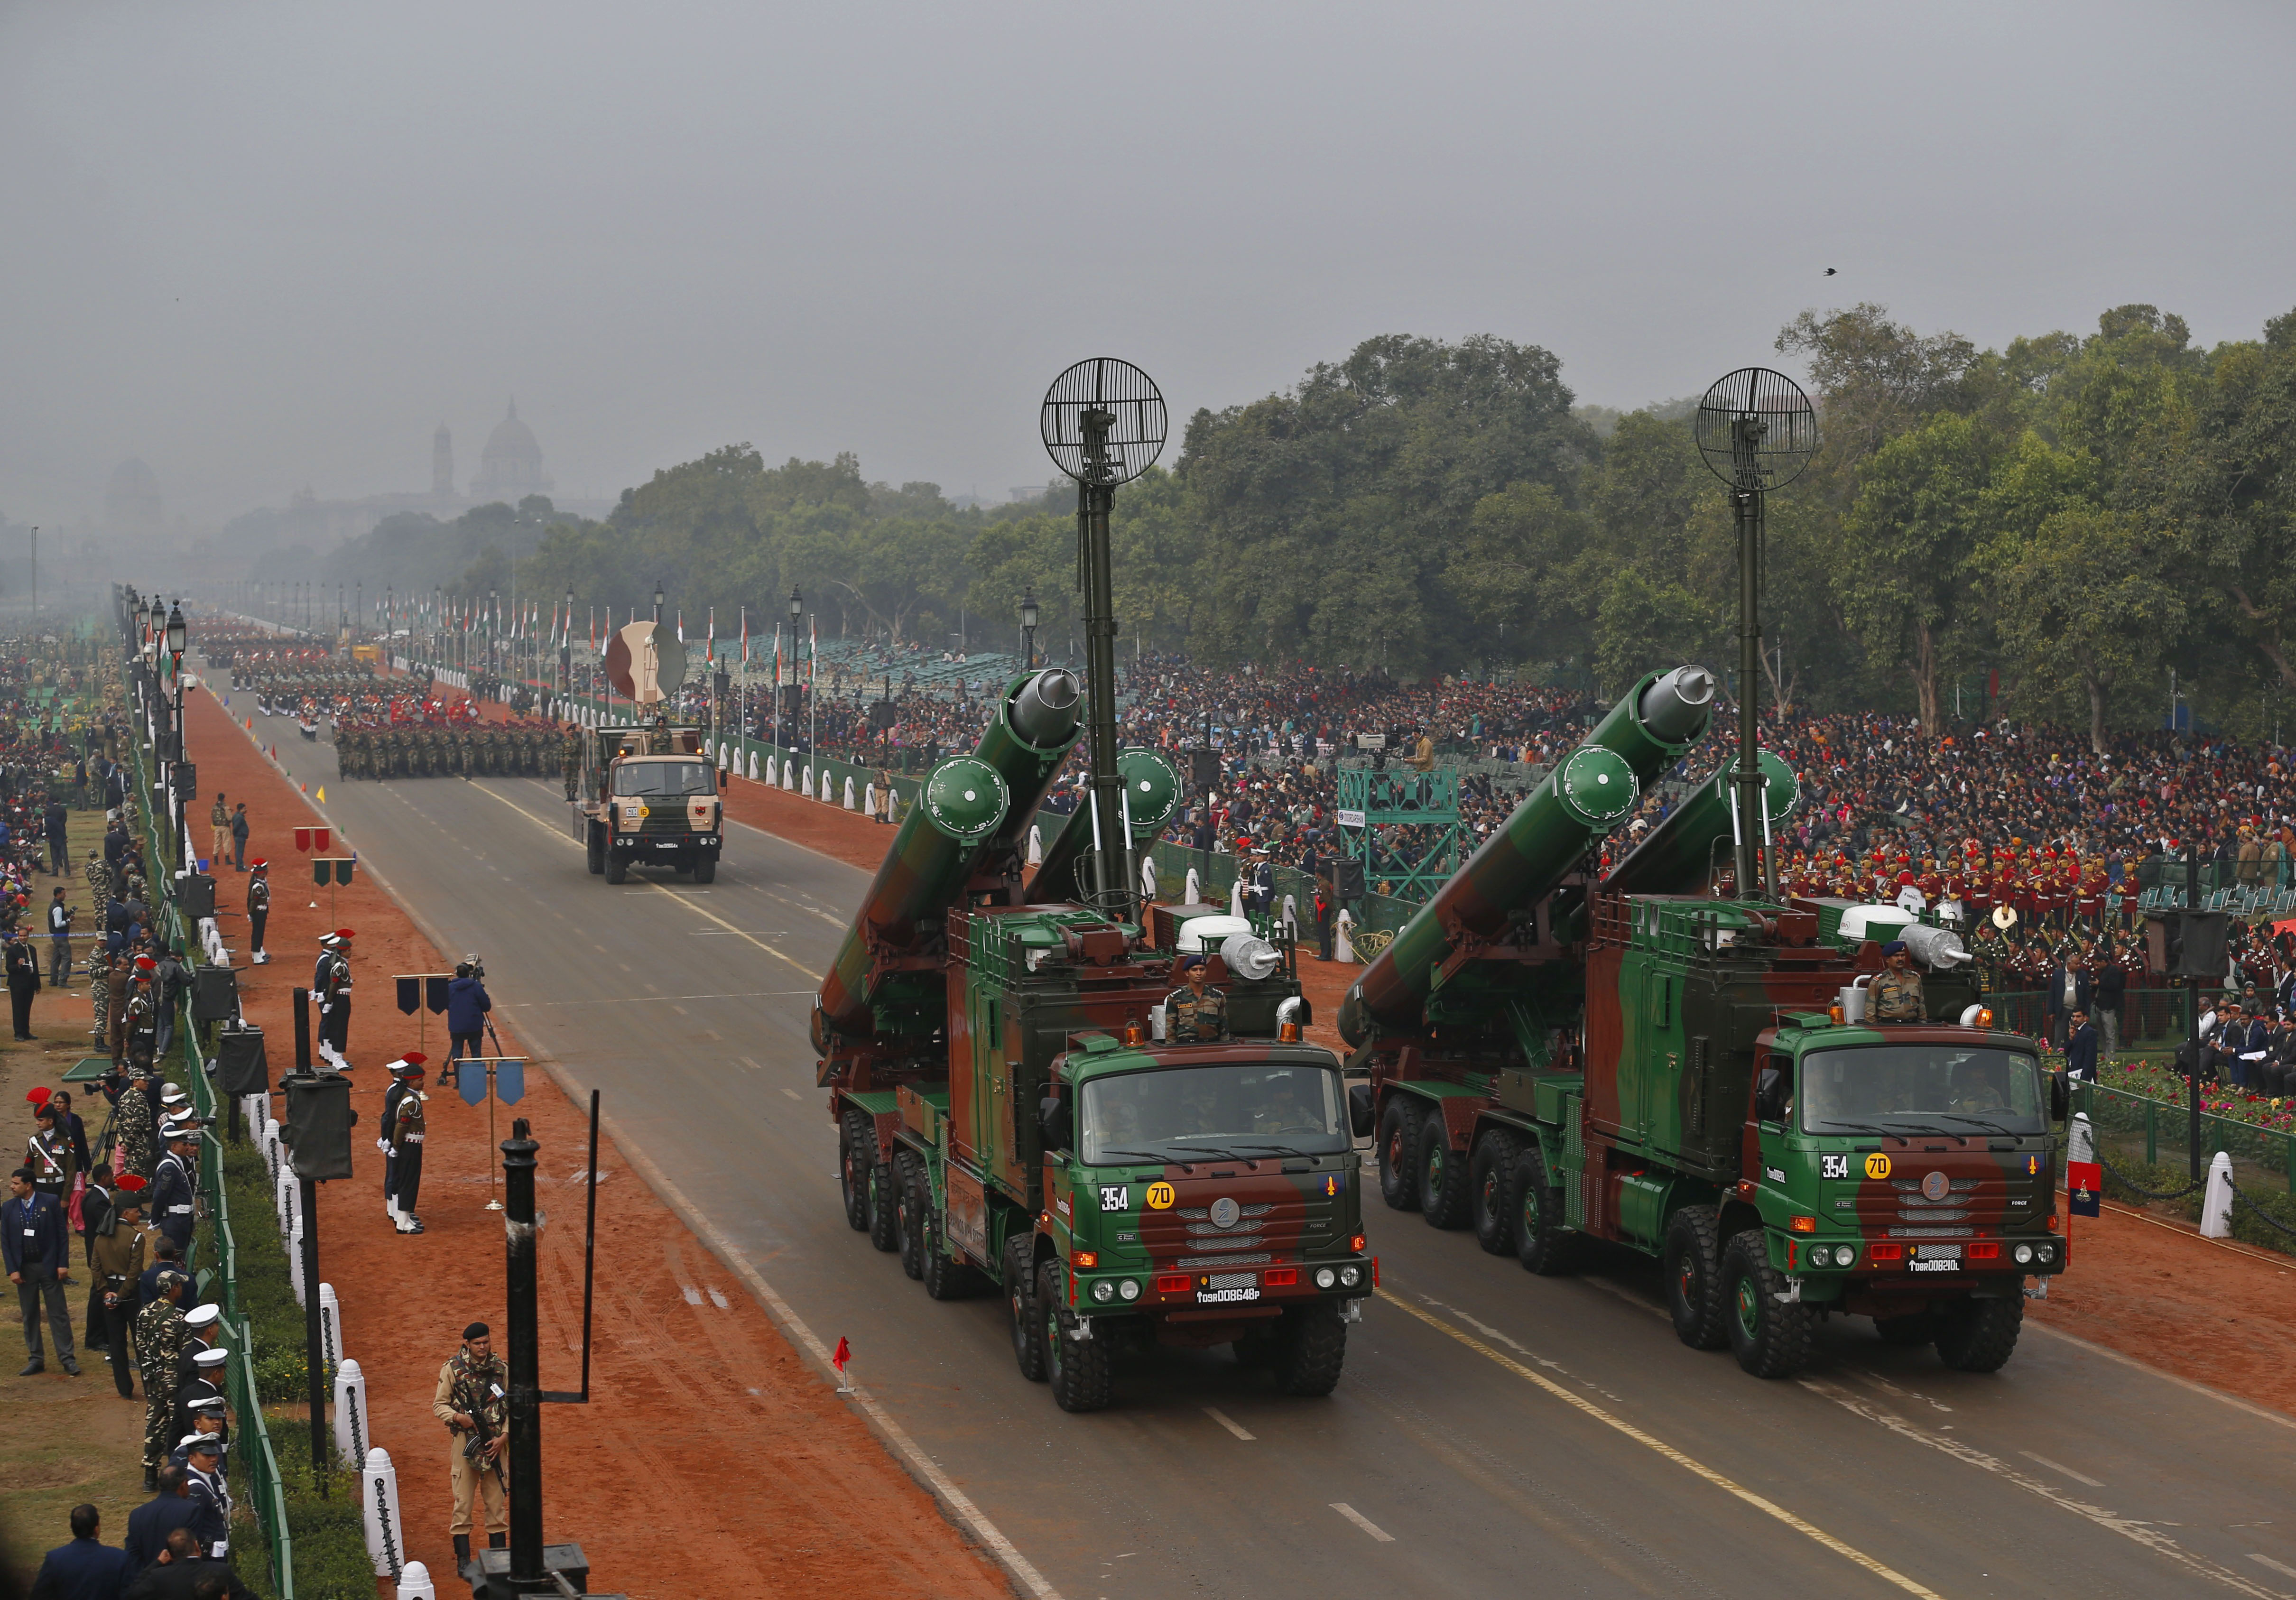 Brahmos supersonic missiles, jointly developed by India and Russia, are displayed during full dress rehearsals for the Republic Day parade in New Delhi, India, Thursday, Jan. 23, 2014.